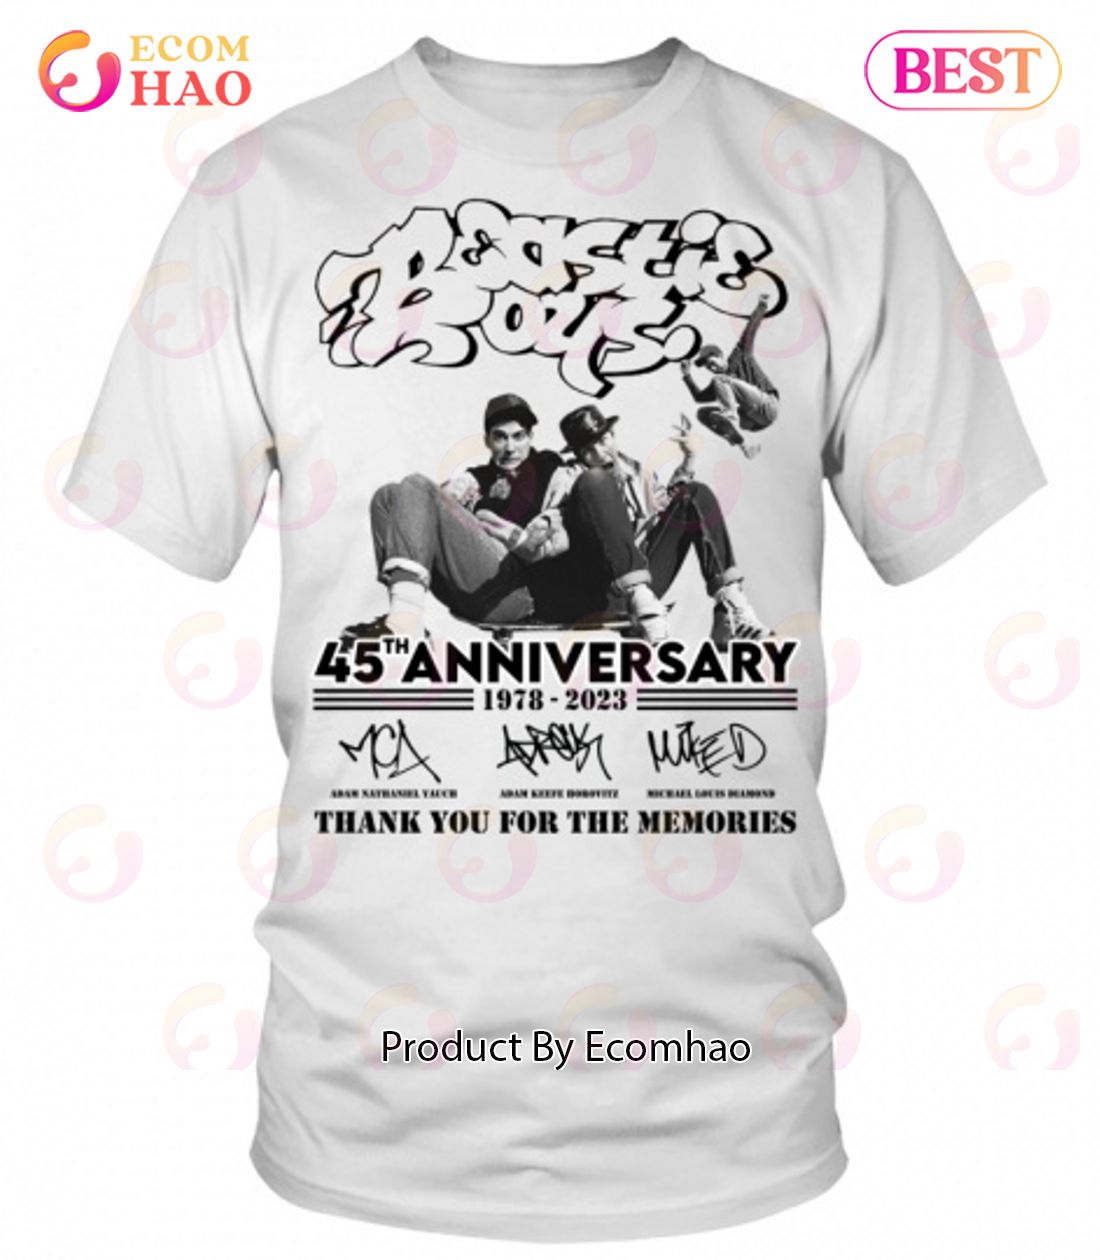 45th Anniversary 1978 – 2023 Beastie Boys Thank You For The Memories T-Shirt